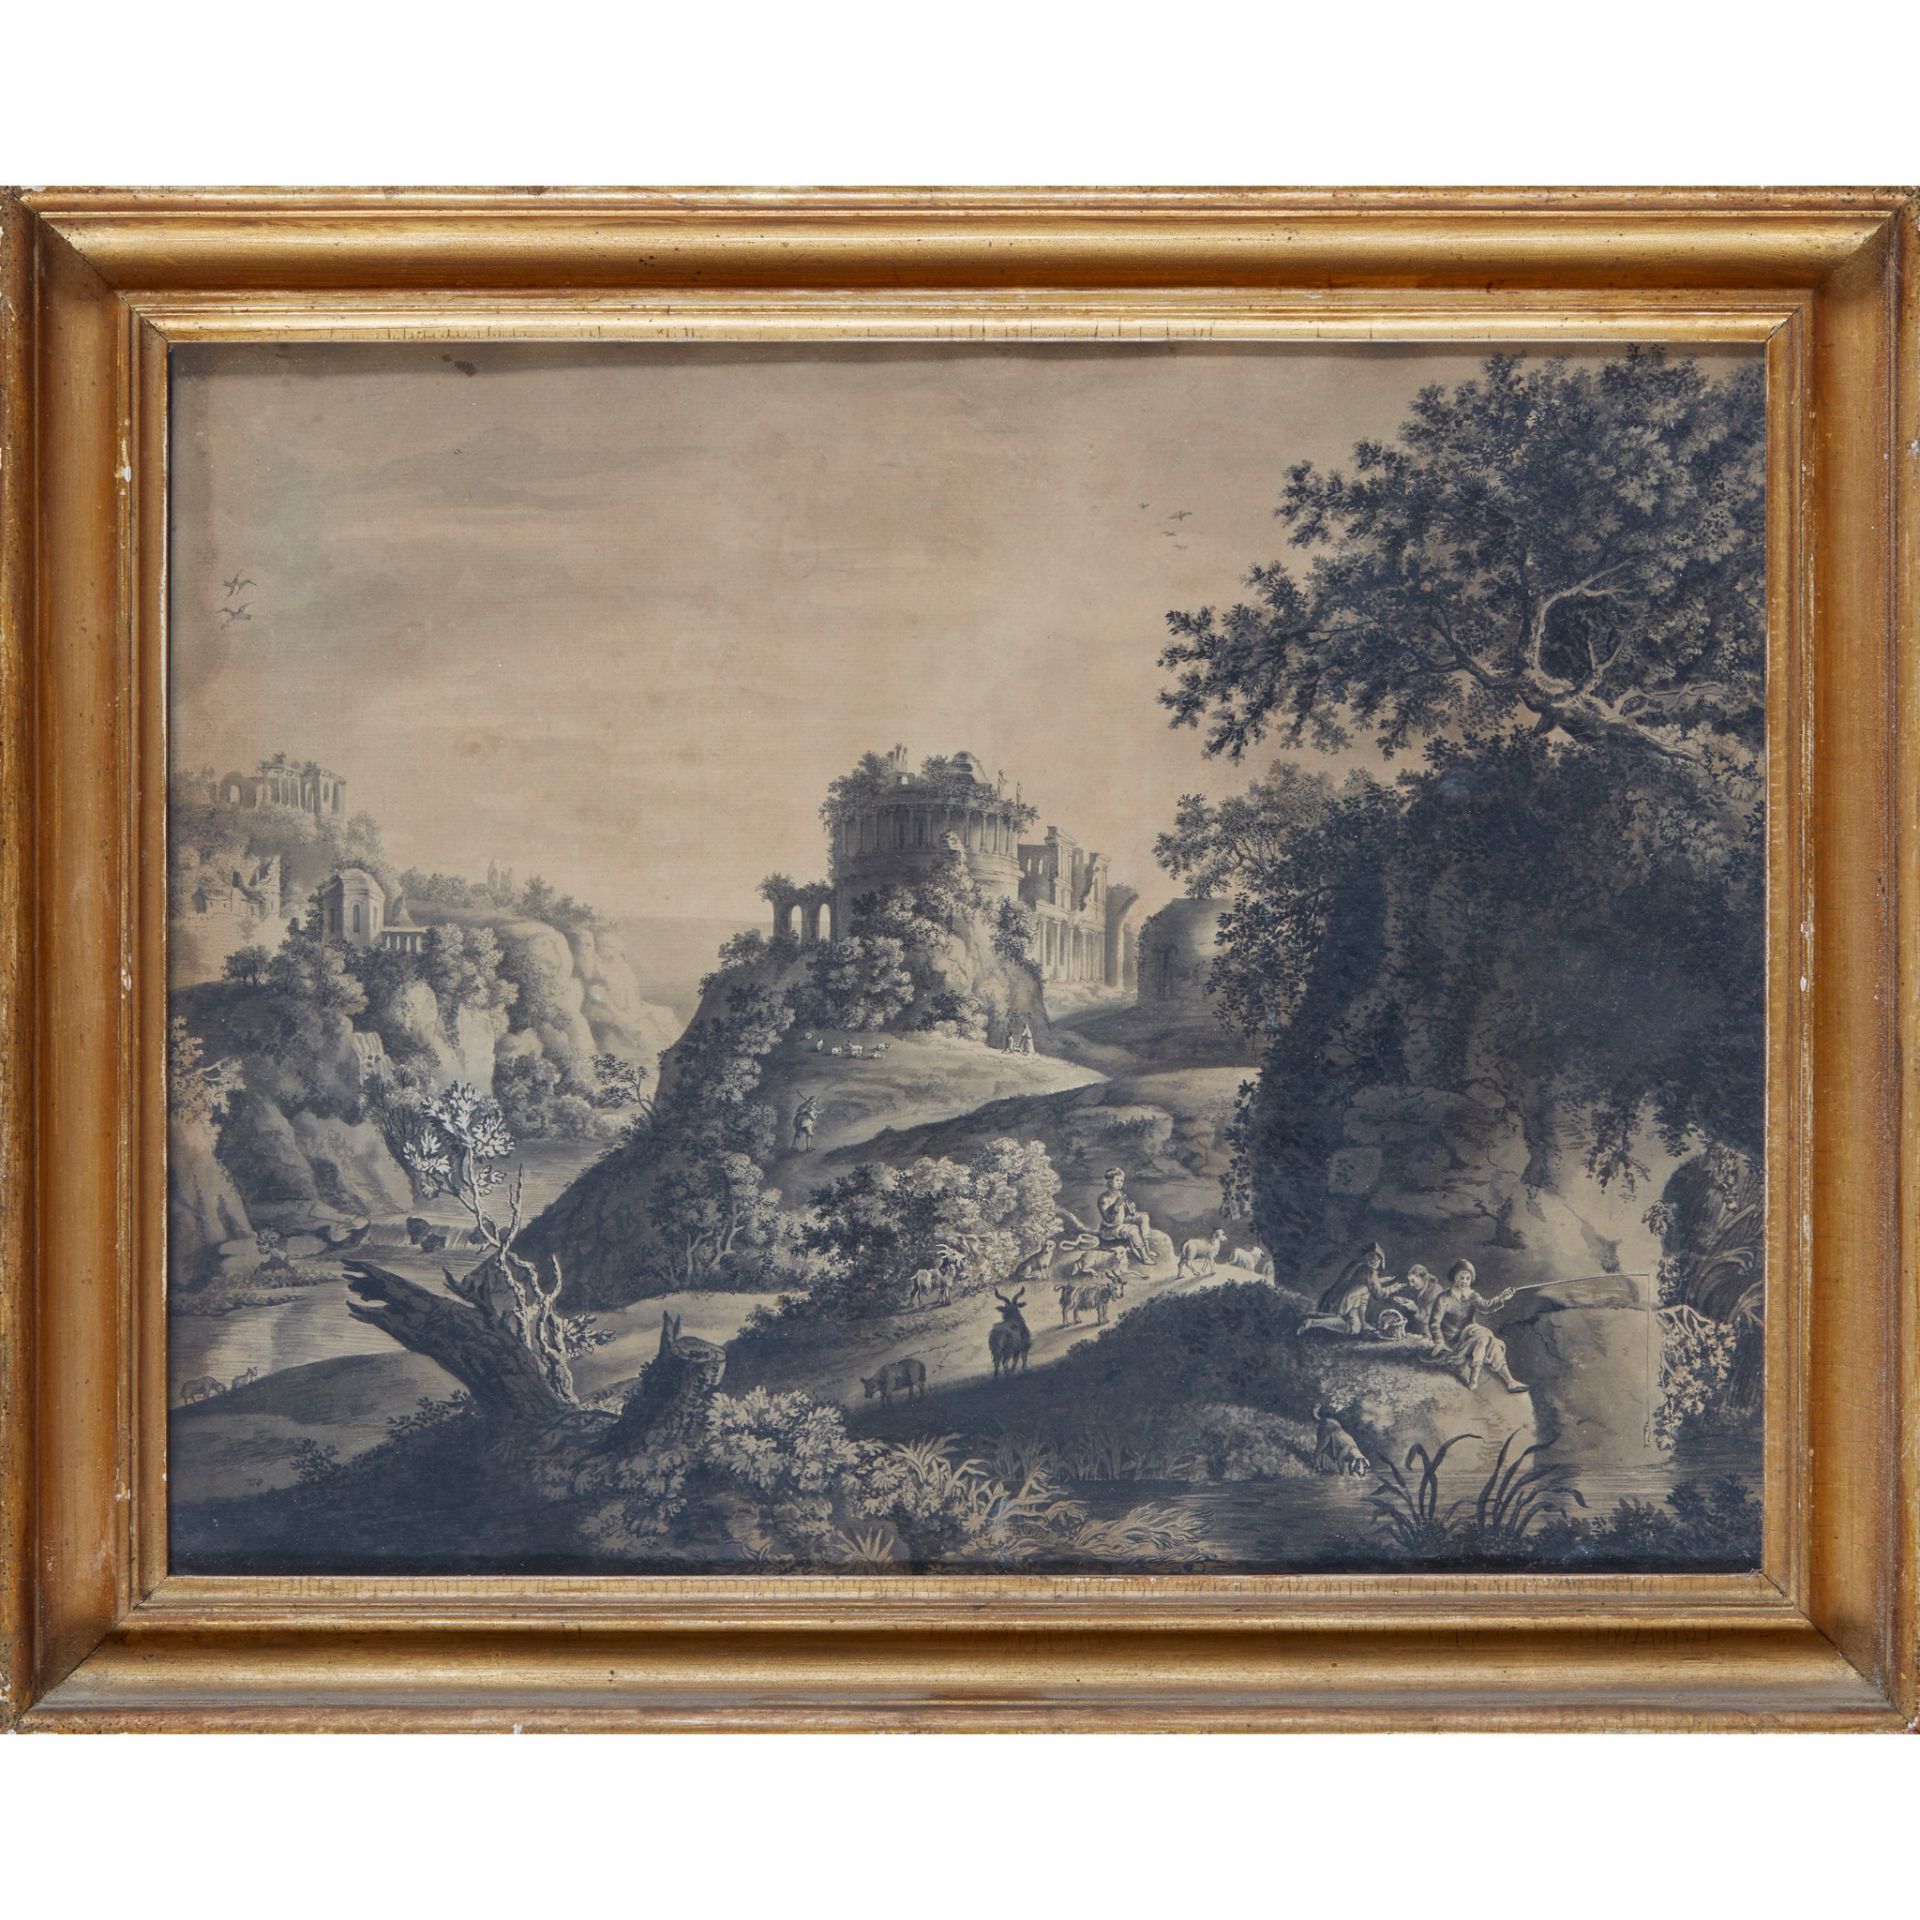 MANNER OF JACOB PHILIPP HACKERT AN ITALIANATE LANDSCAPE WITH FISHERMAN - Image 2 of 2